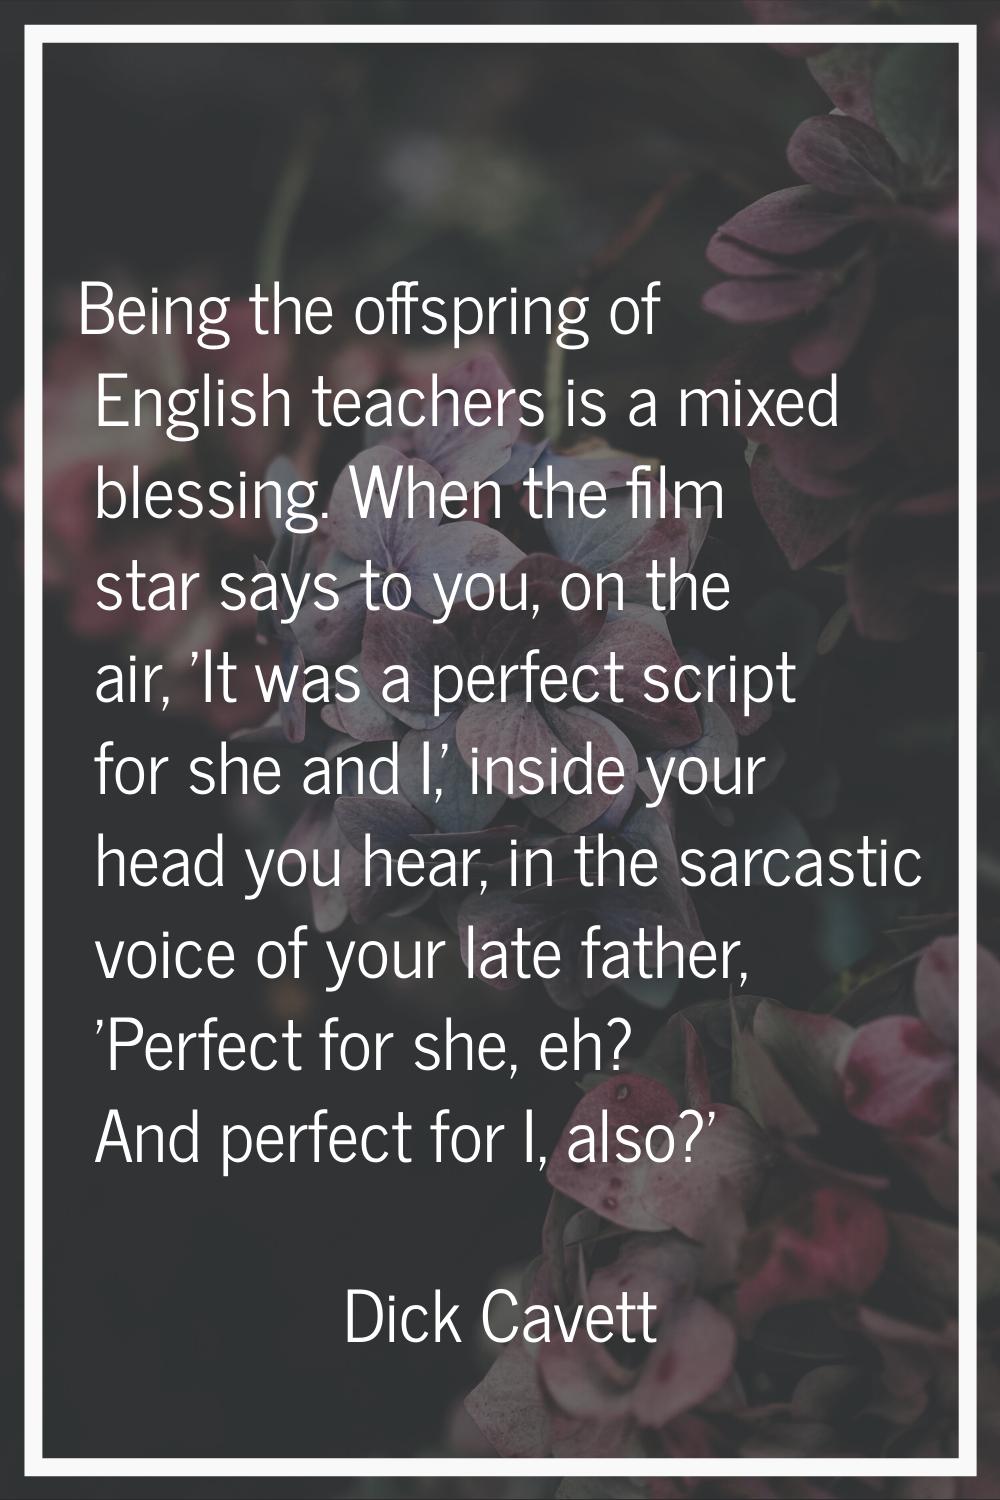 Being the offspring of English teachers is a mixed blessing. When the film star says to you, on the